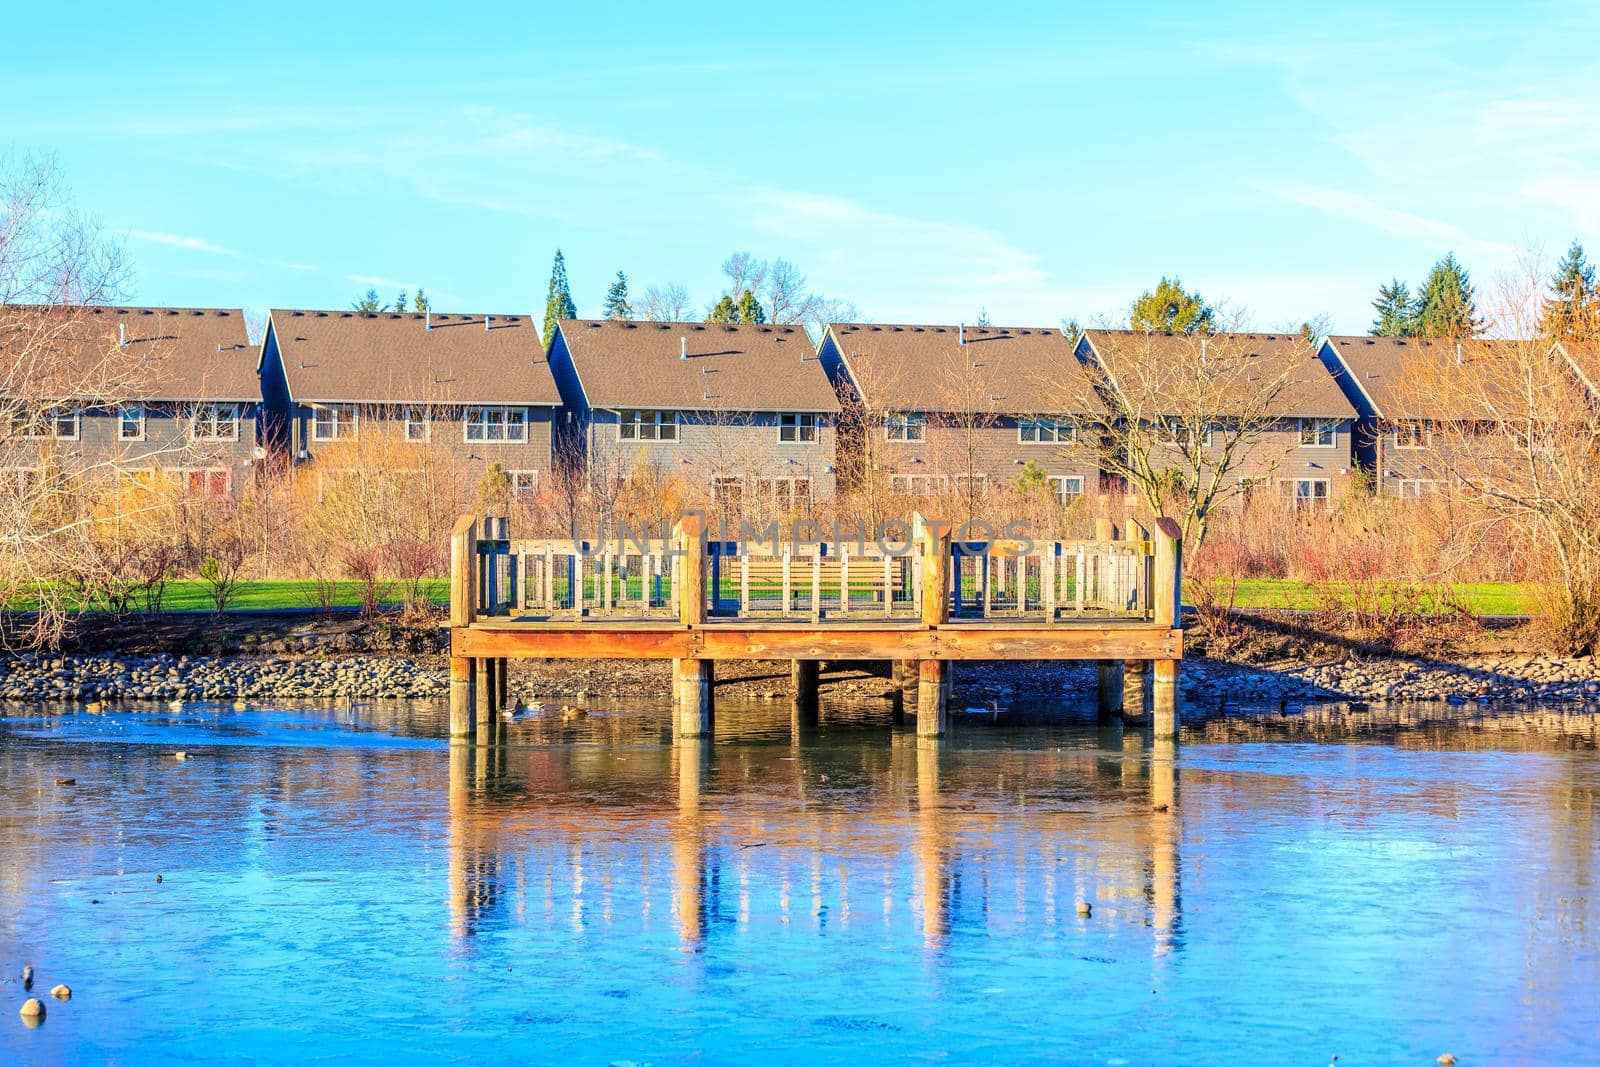 A small wooden deck at the lake shore, with residence buildings in the back ground.